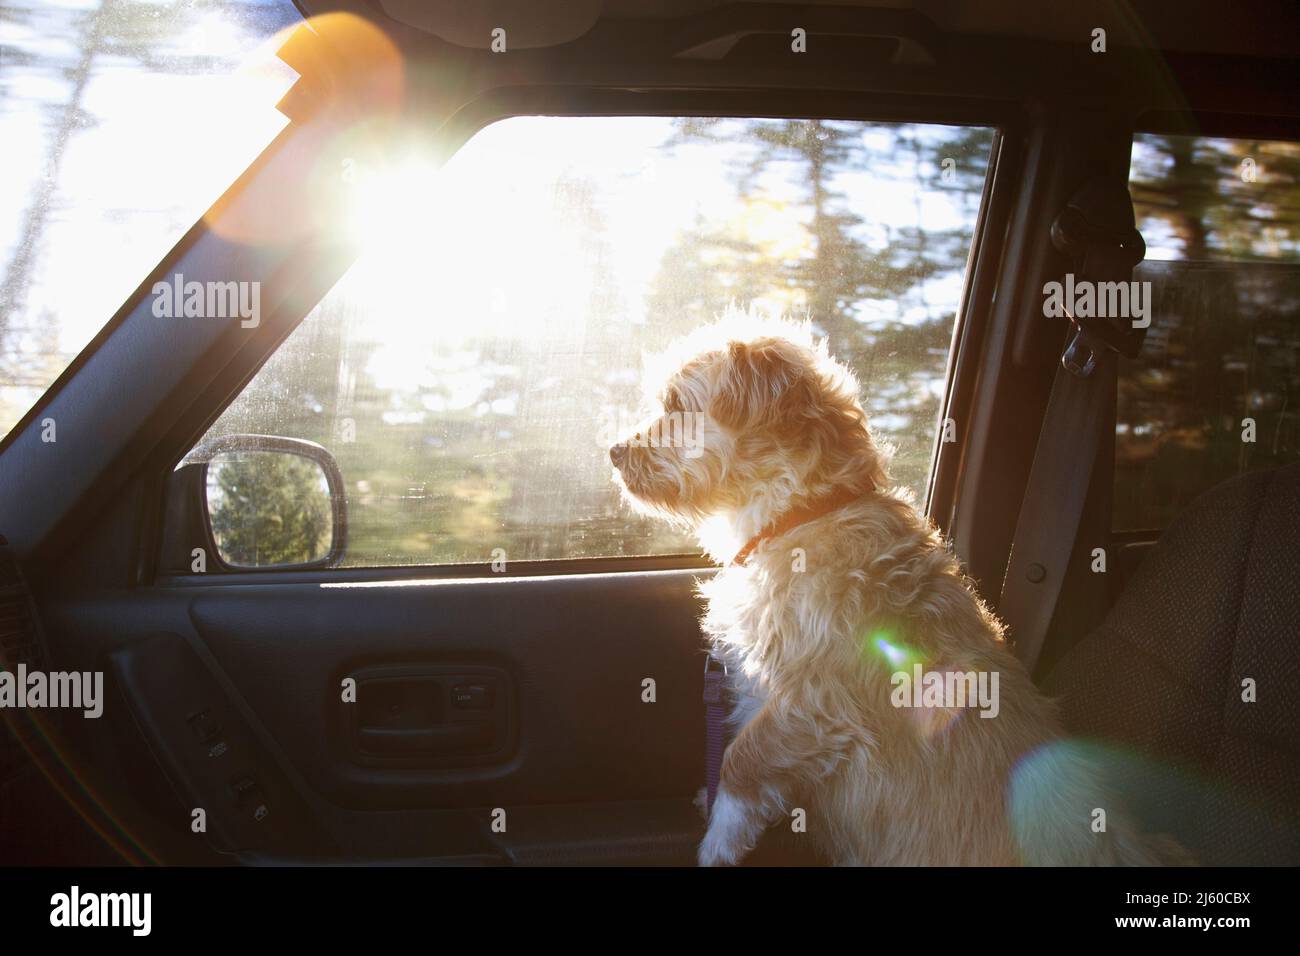 Female Terrier X sitting if front seat of vehicle Stock Photo